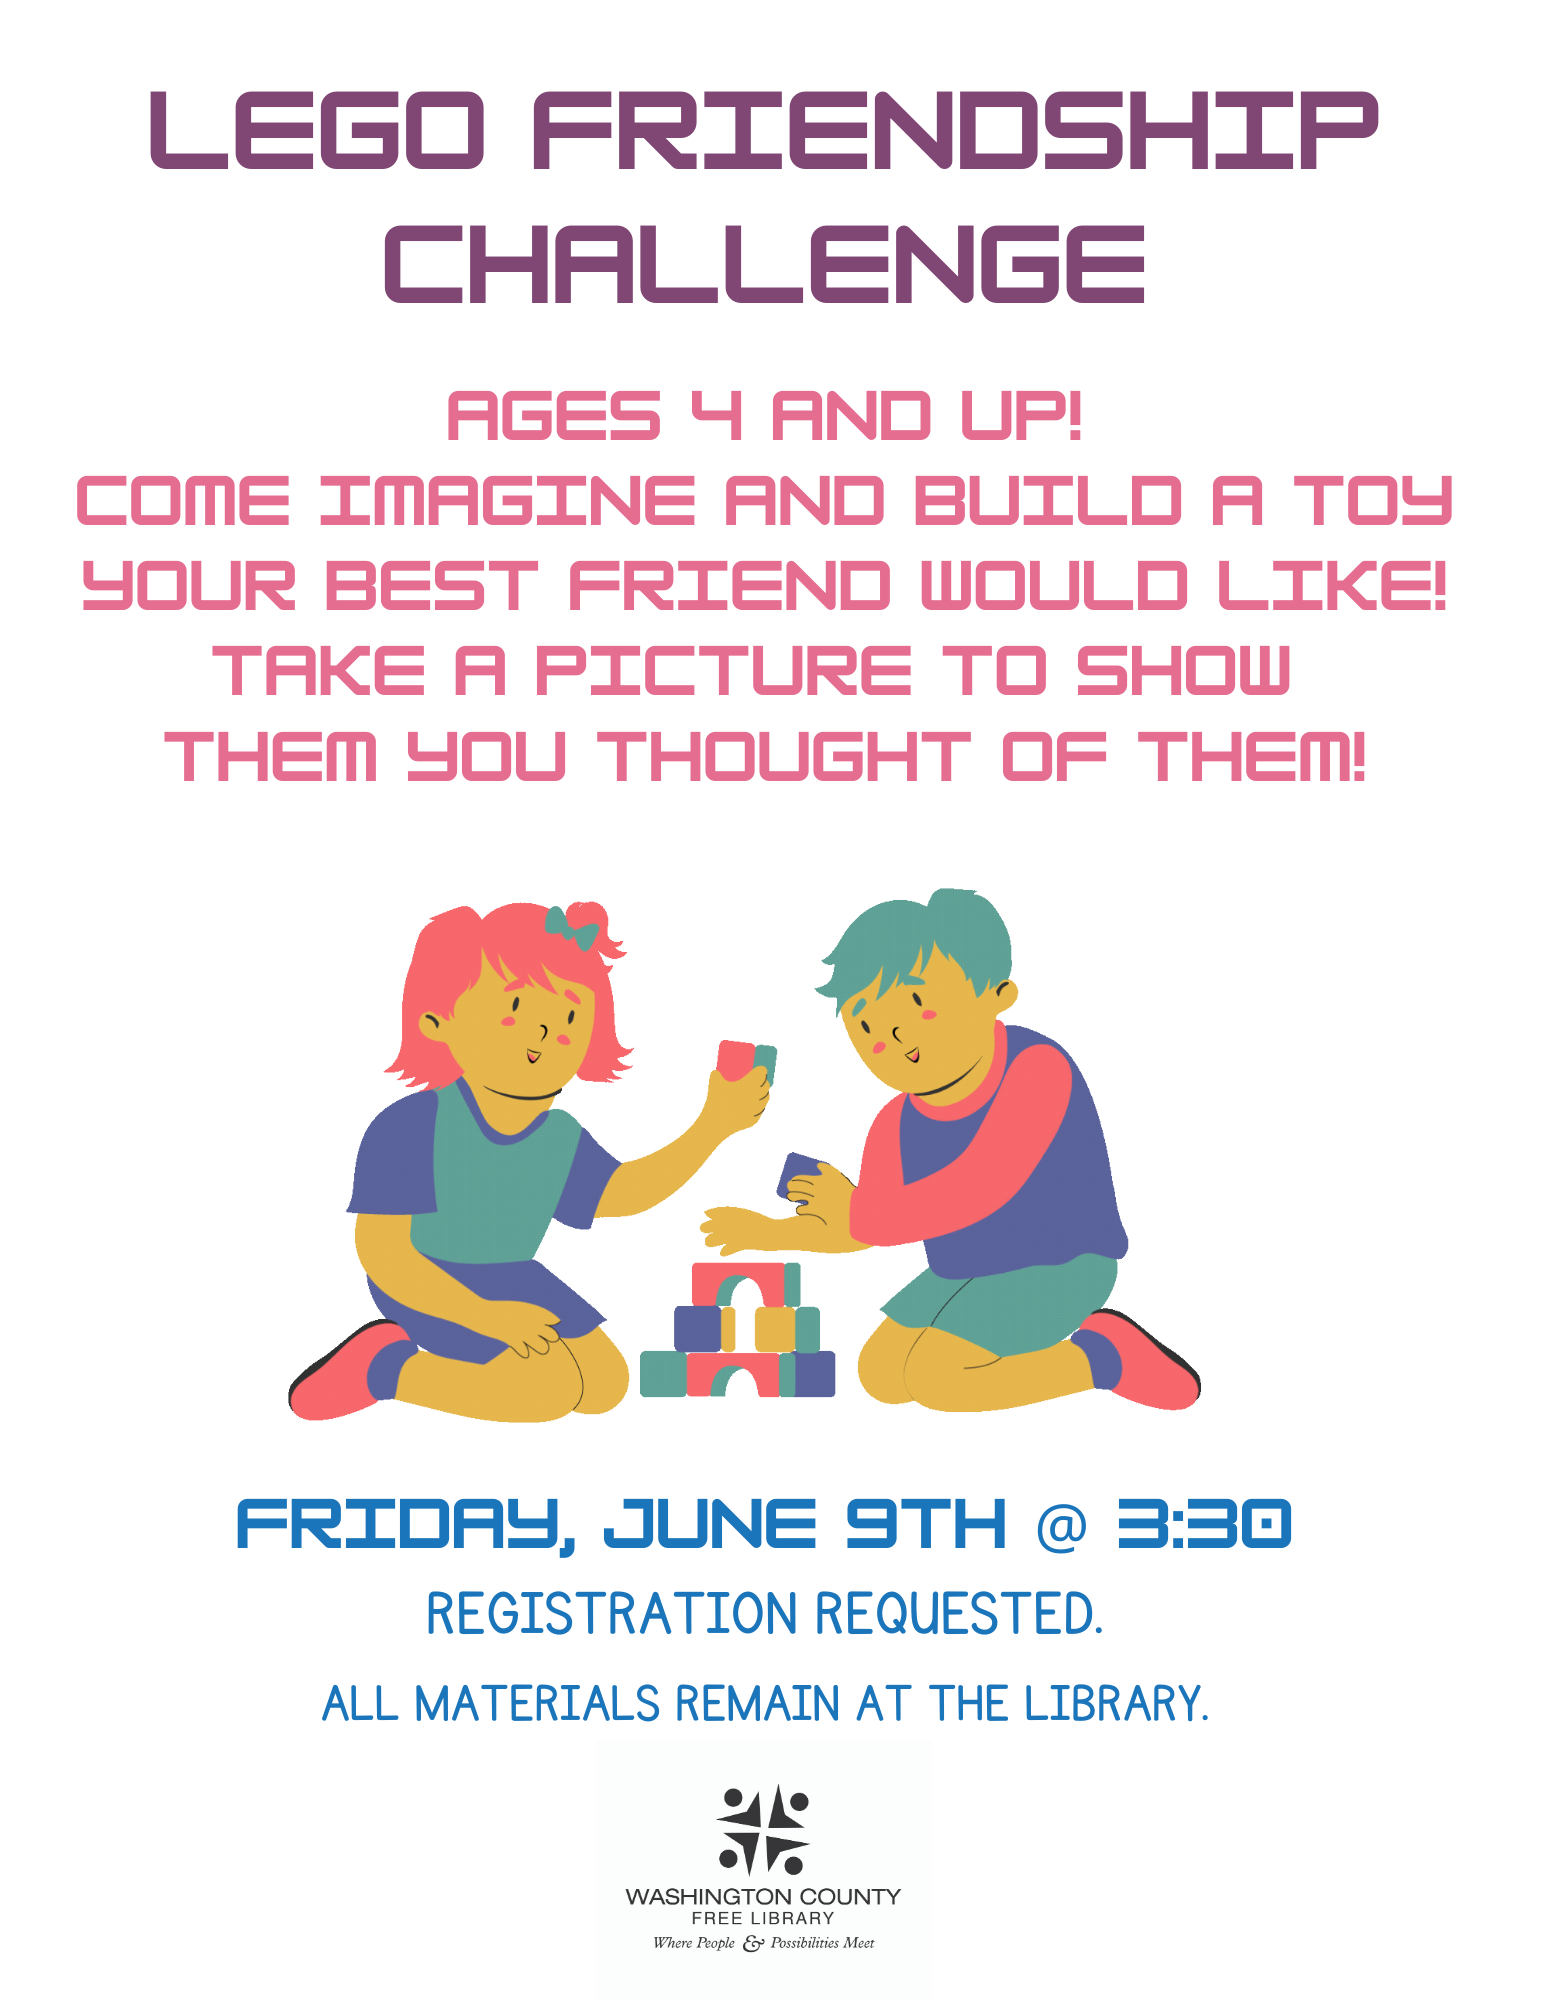 Legos at the Library: Frienship Challenge